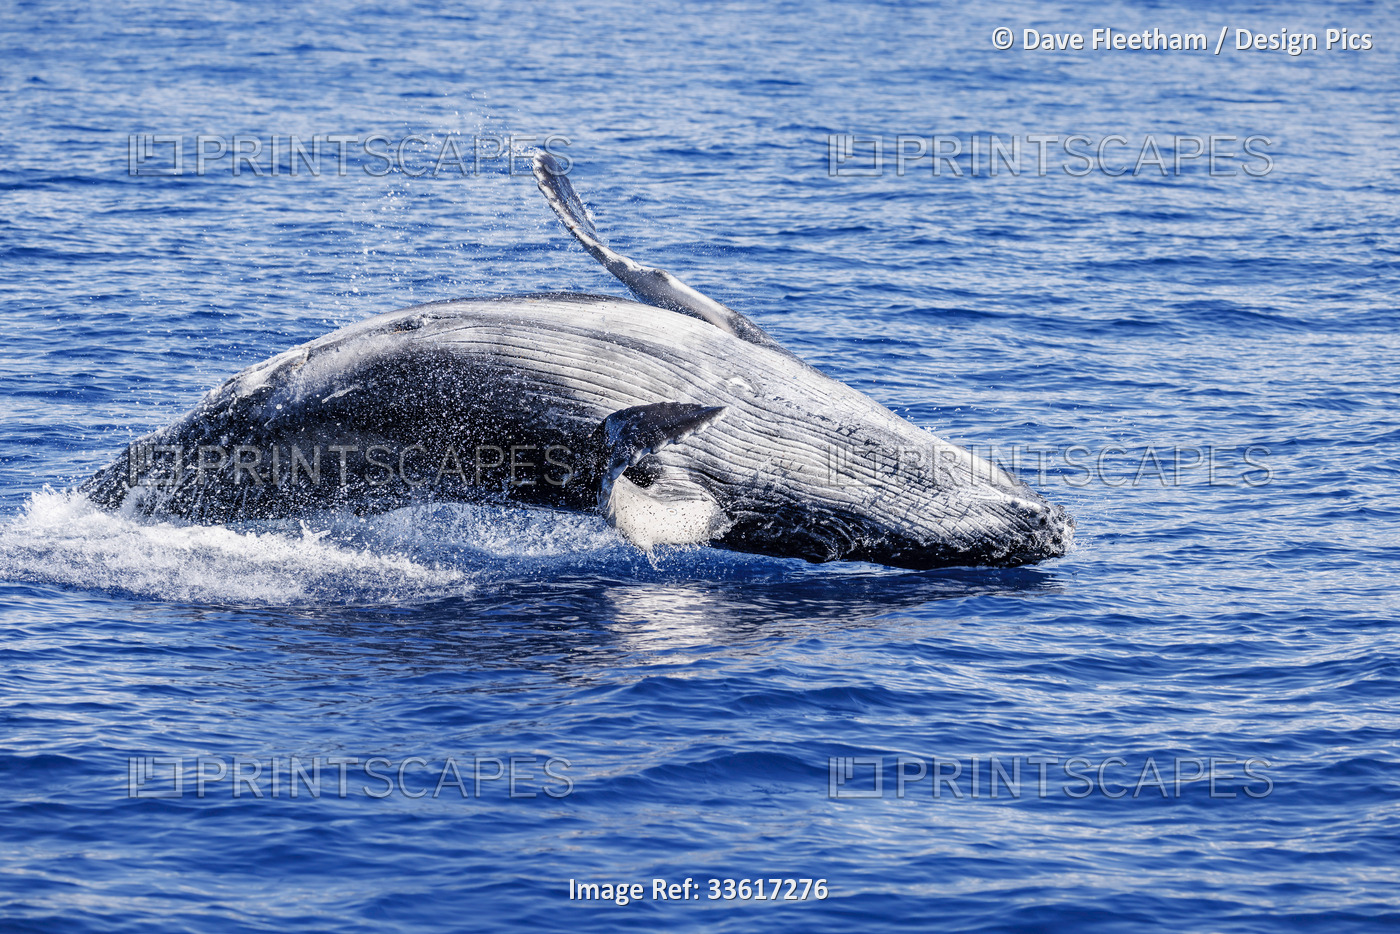 This breaching Humpback whale calf (Megaptera novaeangliae) is likely around ...